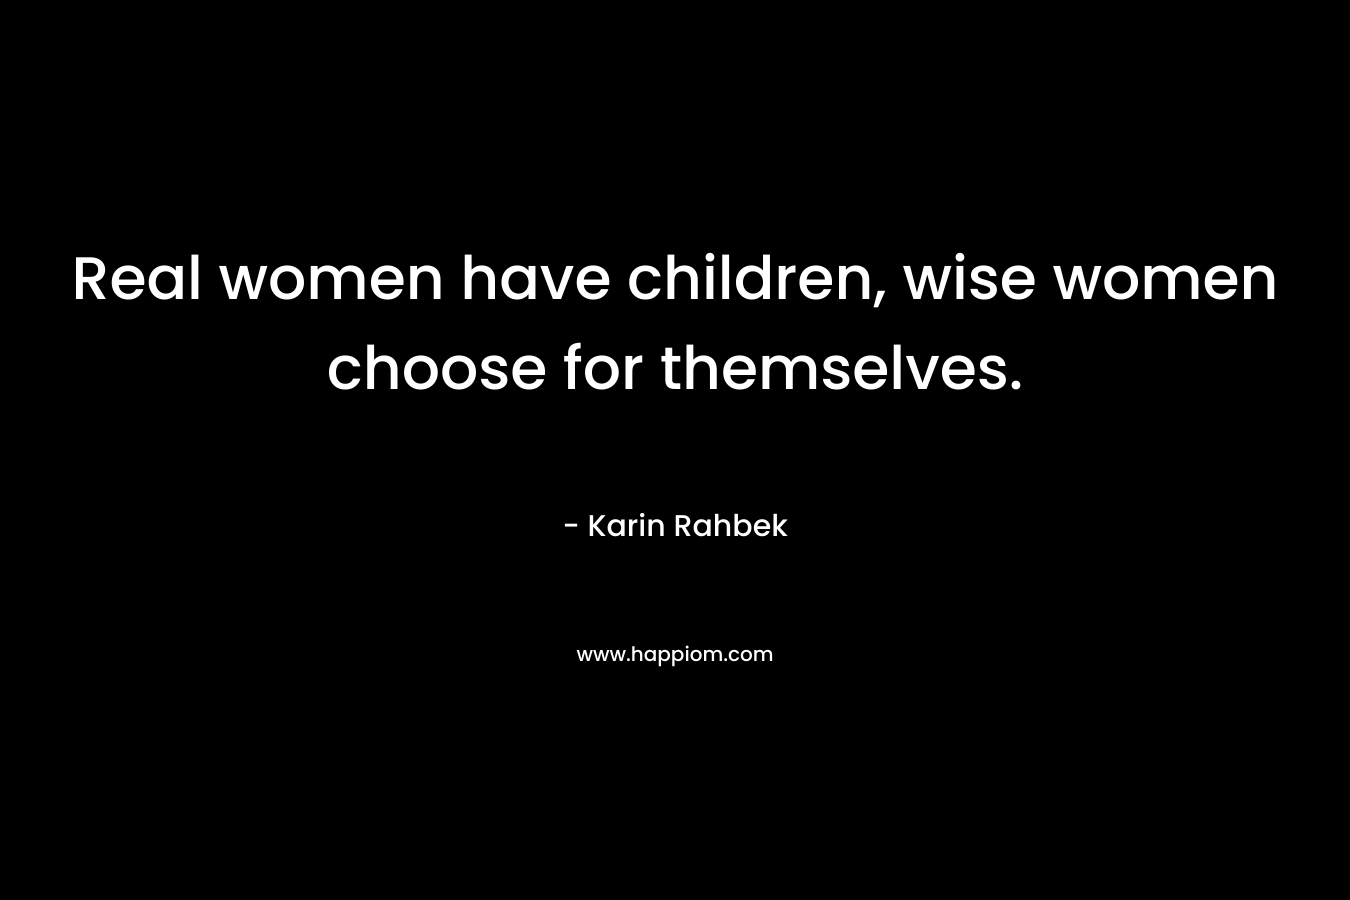 Real women have children, wise women choose for themselves. – Karin Rahbek